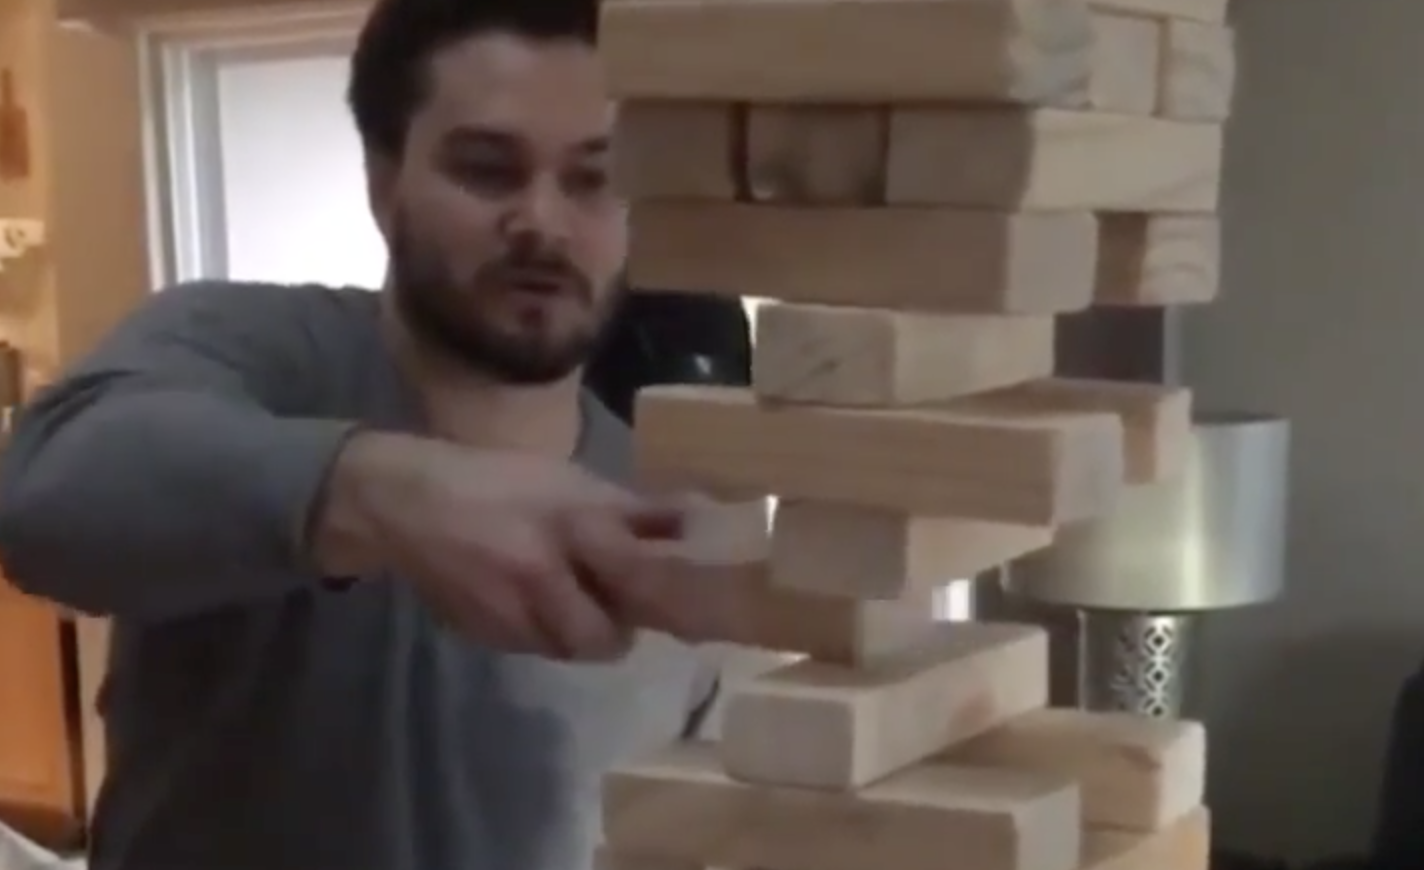 How to Play Jenga, Rules, History and Strategies to Win Game